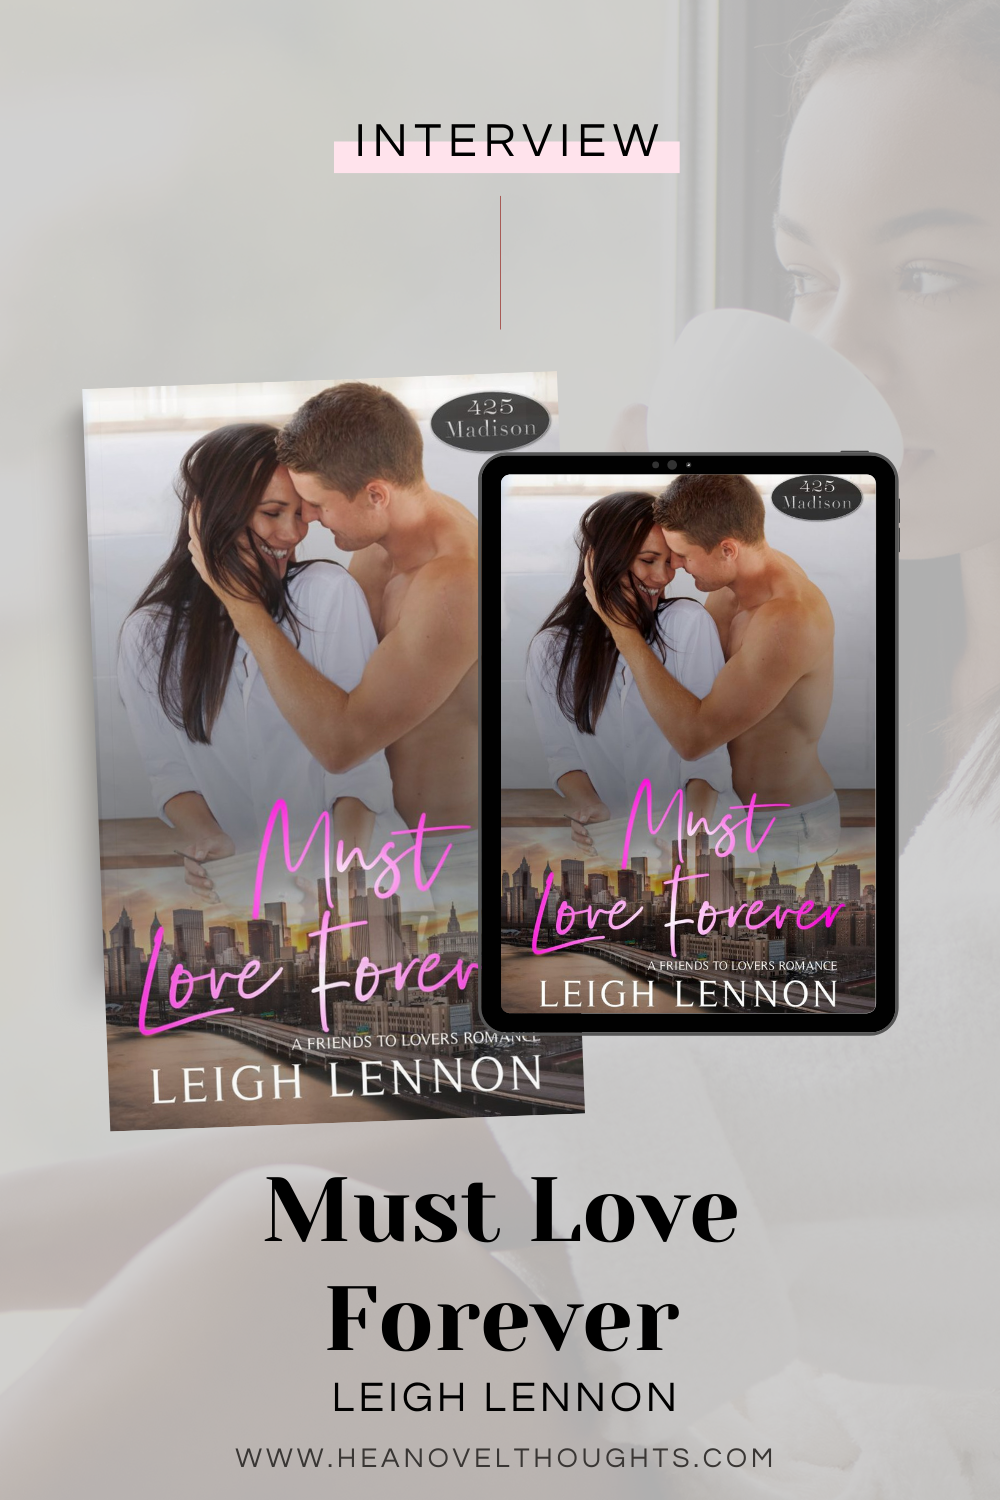 Leigh Lennon: Exclusive Interview & Excerpt